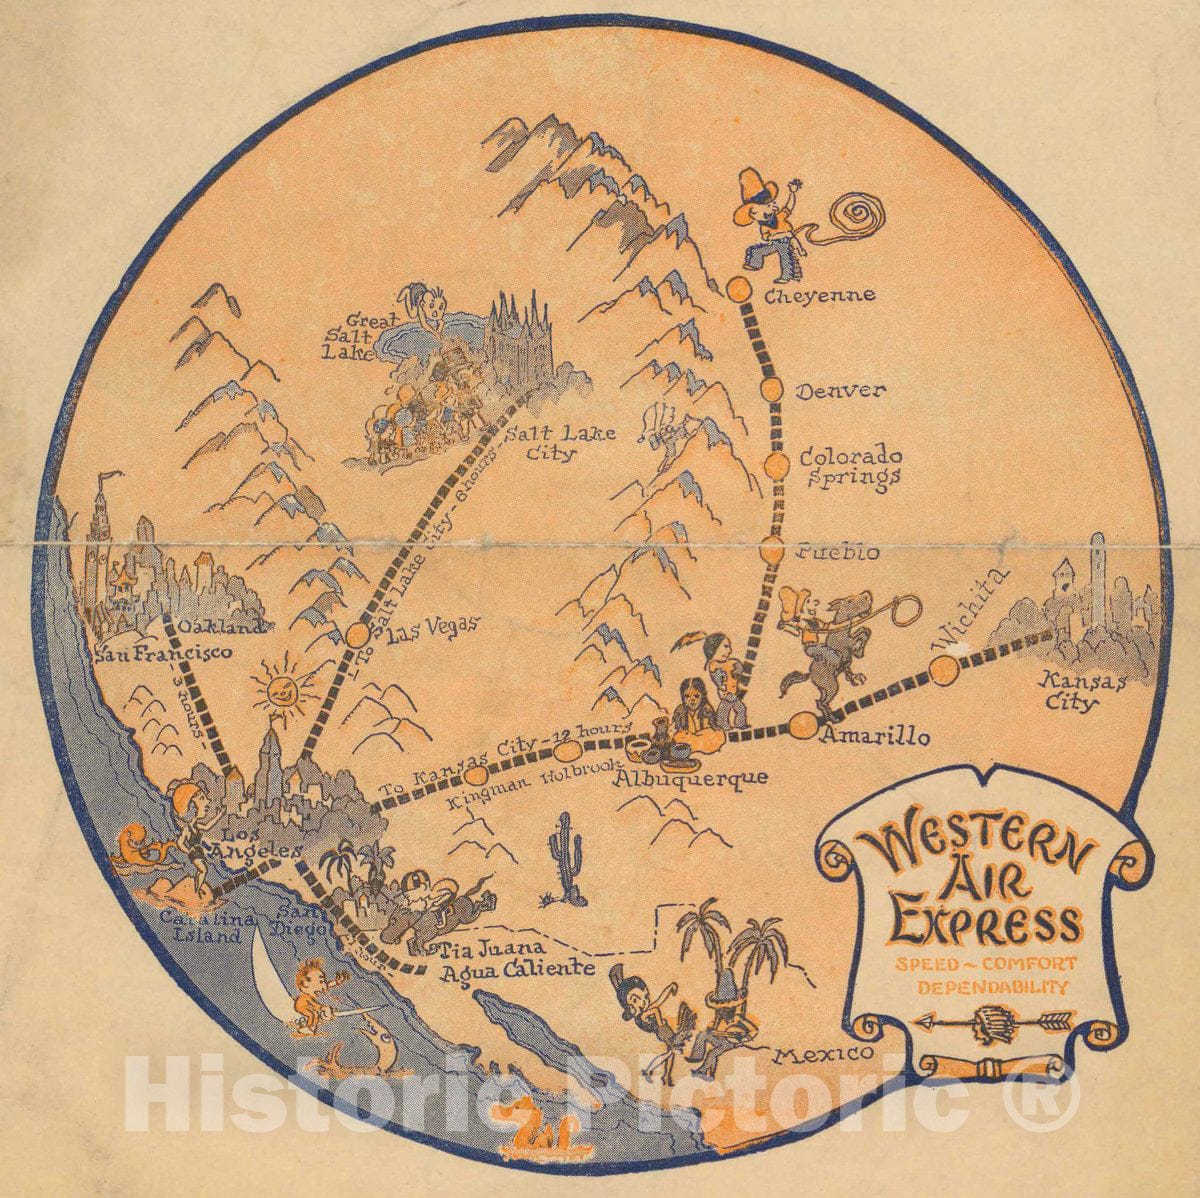 Historic Map : Western Air Express, 1926 Pictorial Map - Vintage Wall Art